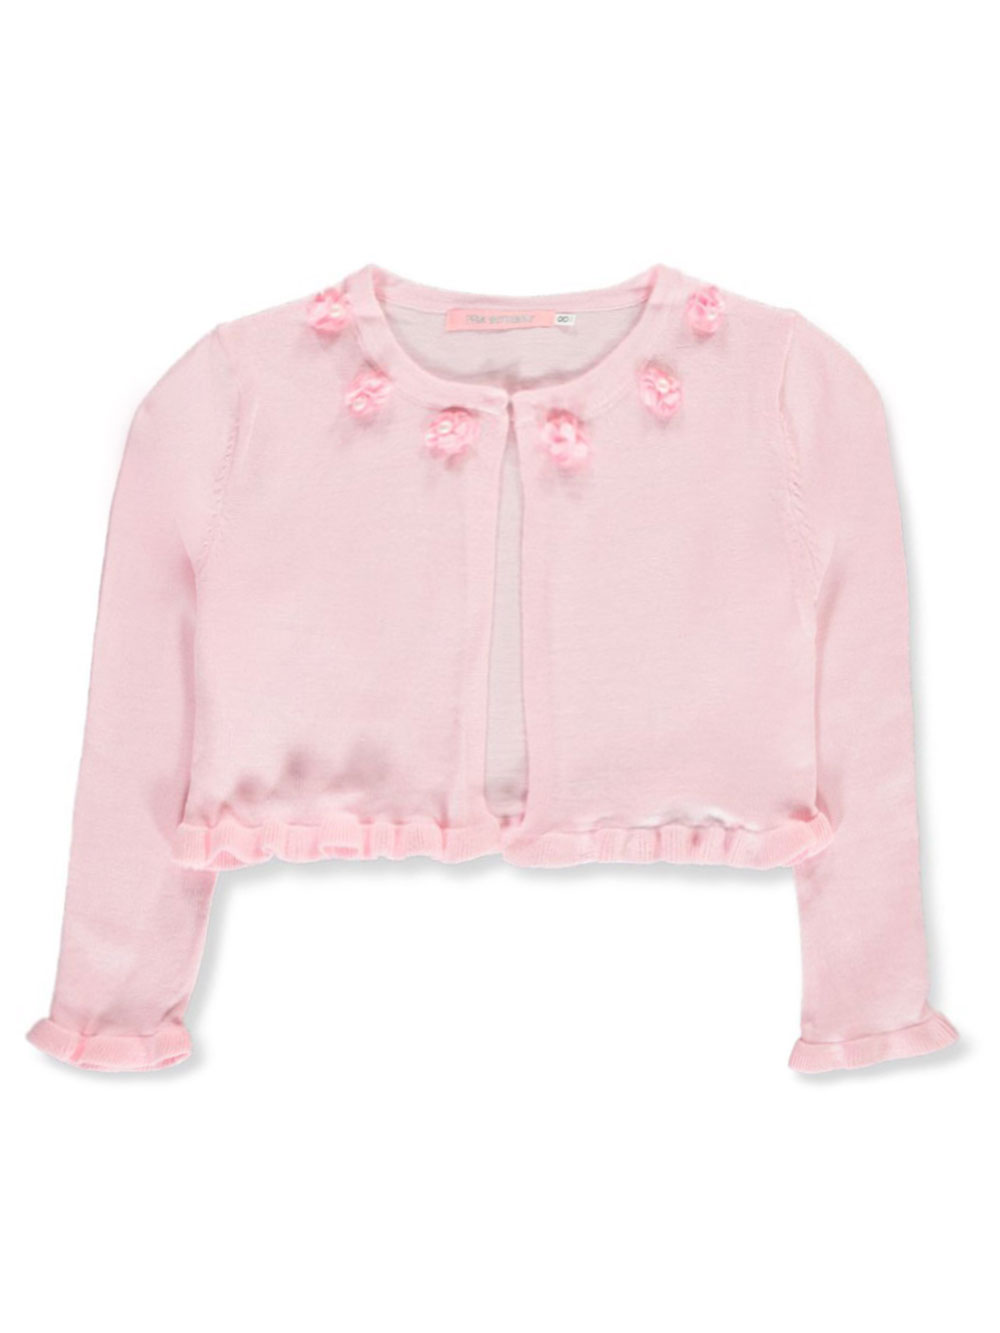 Pink Butterfly Girls' Flower and Pearl Knit Shrug - pink, 5 (Little Girls) - image 1 of 1